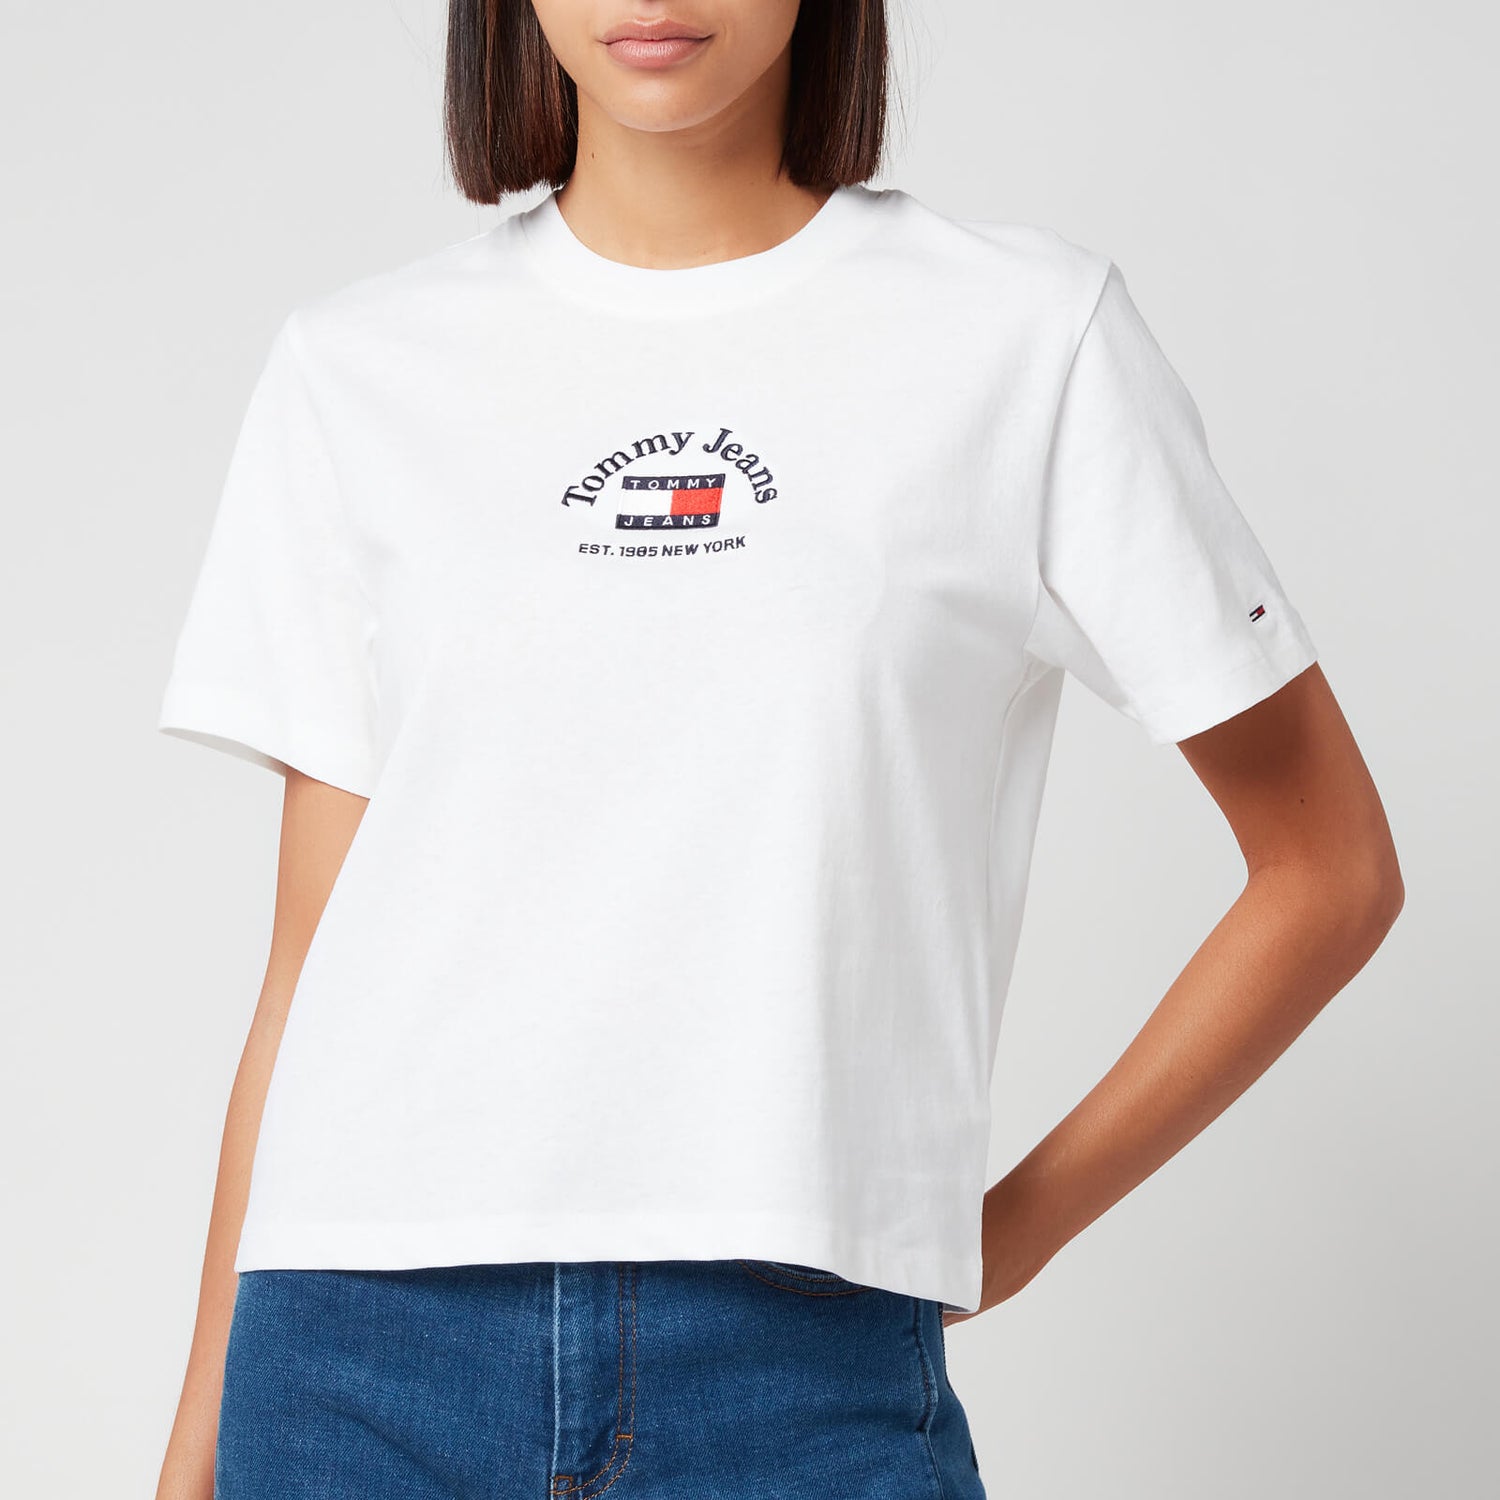 Tommy Jeans Women's Tjw Bxy Crp Timeless Tommy 1 Tee - White